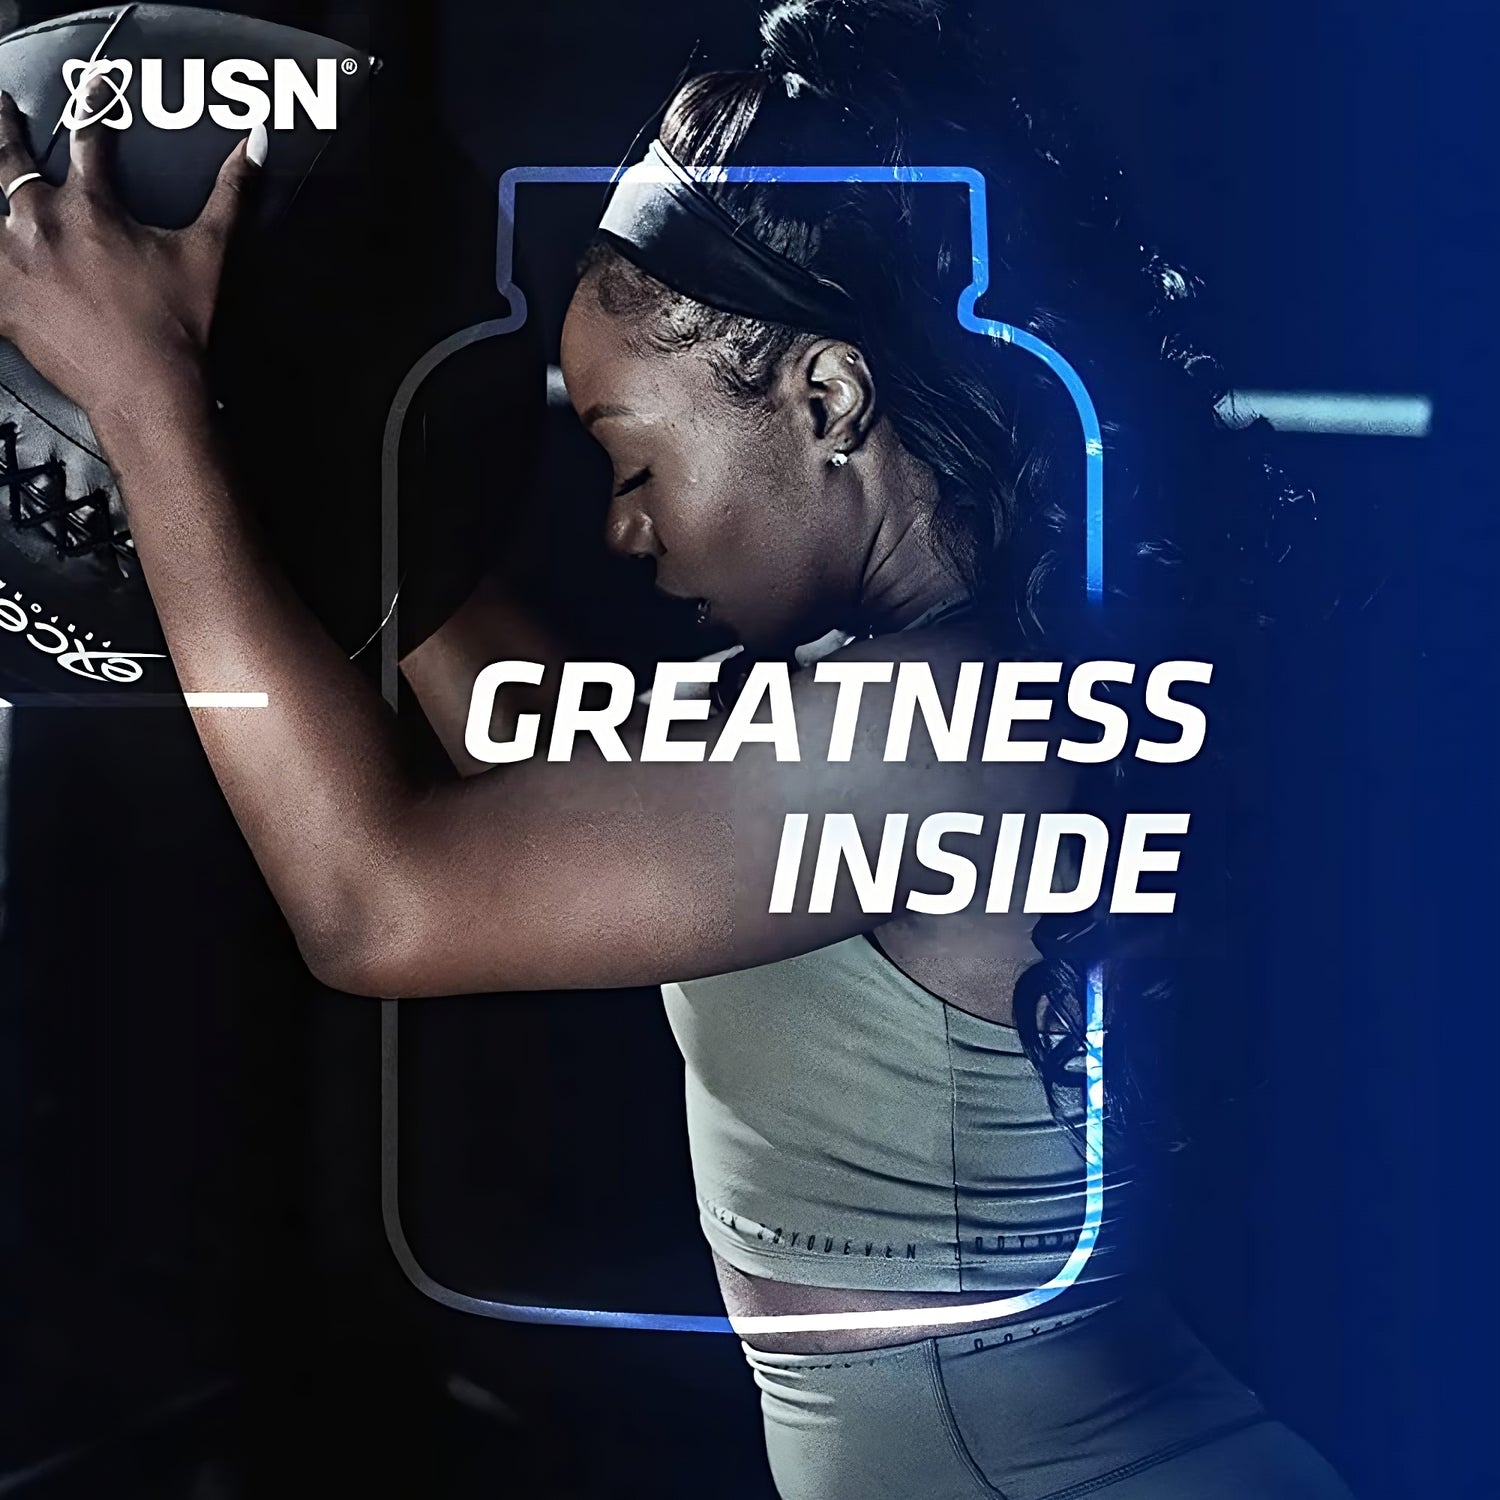 Fuel your fitness with USN sports nutrition - the ultimate performance partner!